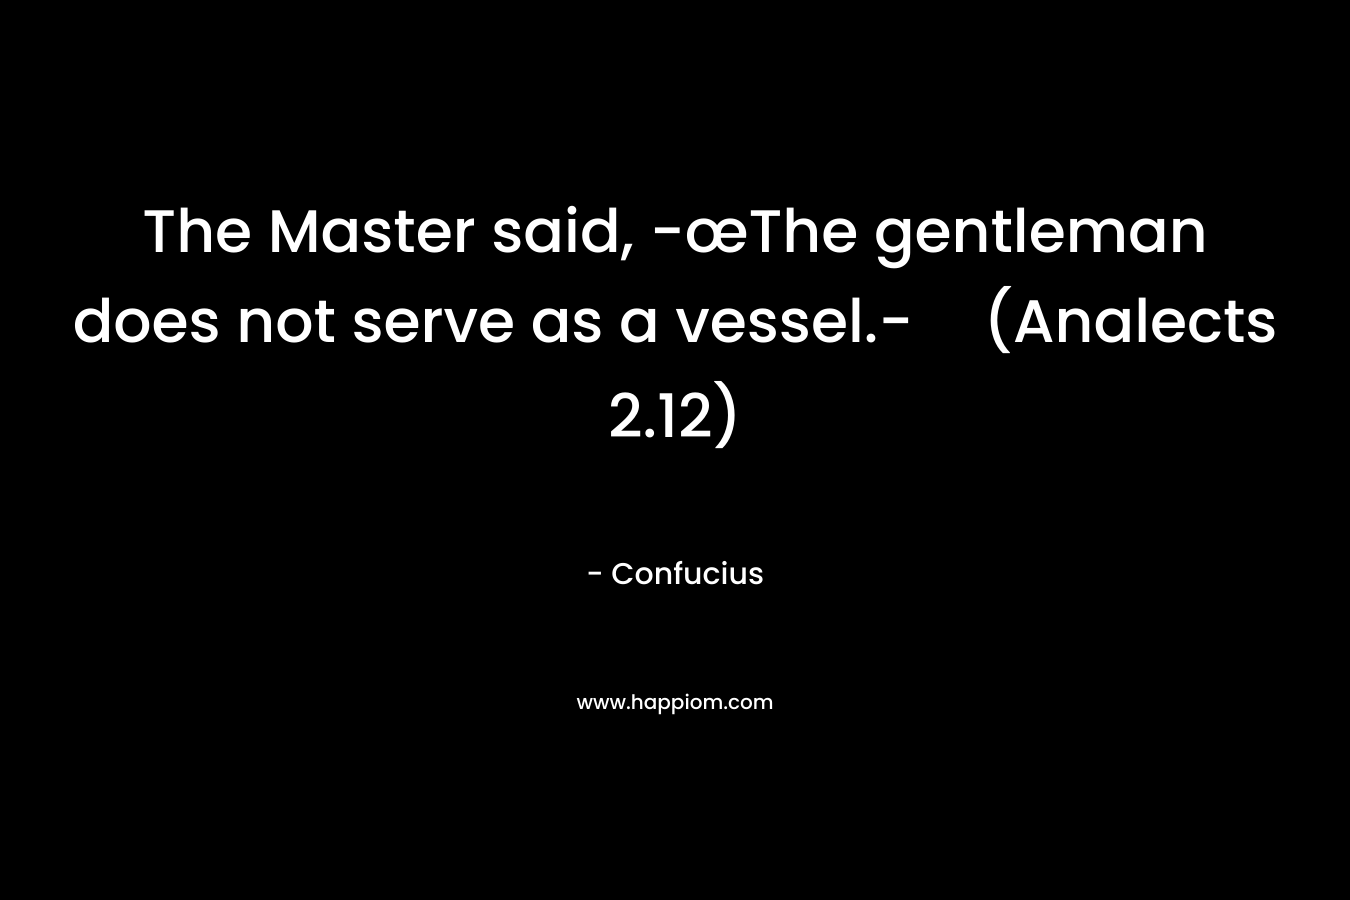 The Master said, -œThe gentleman does not serve as a vessel.-(Analects 2.12)